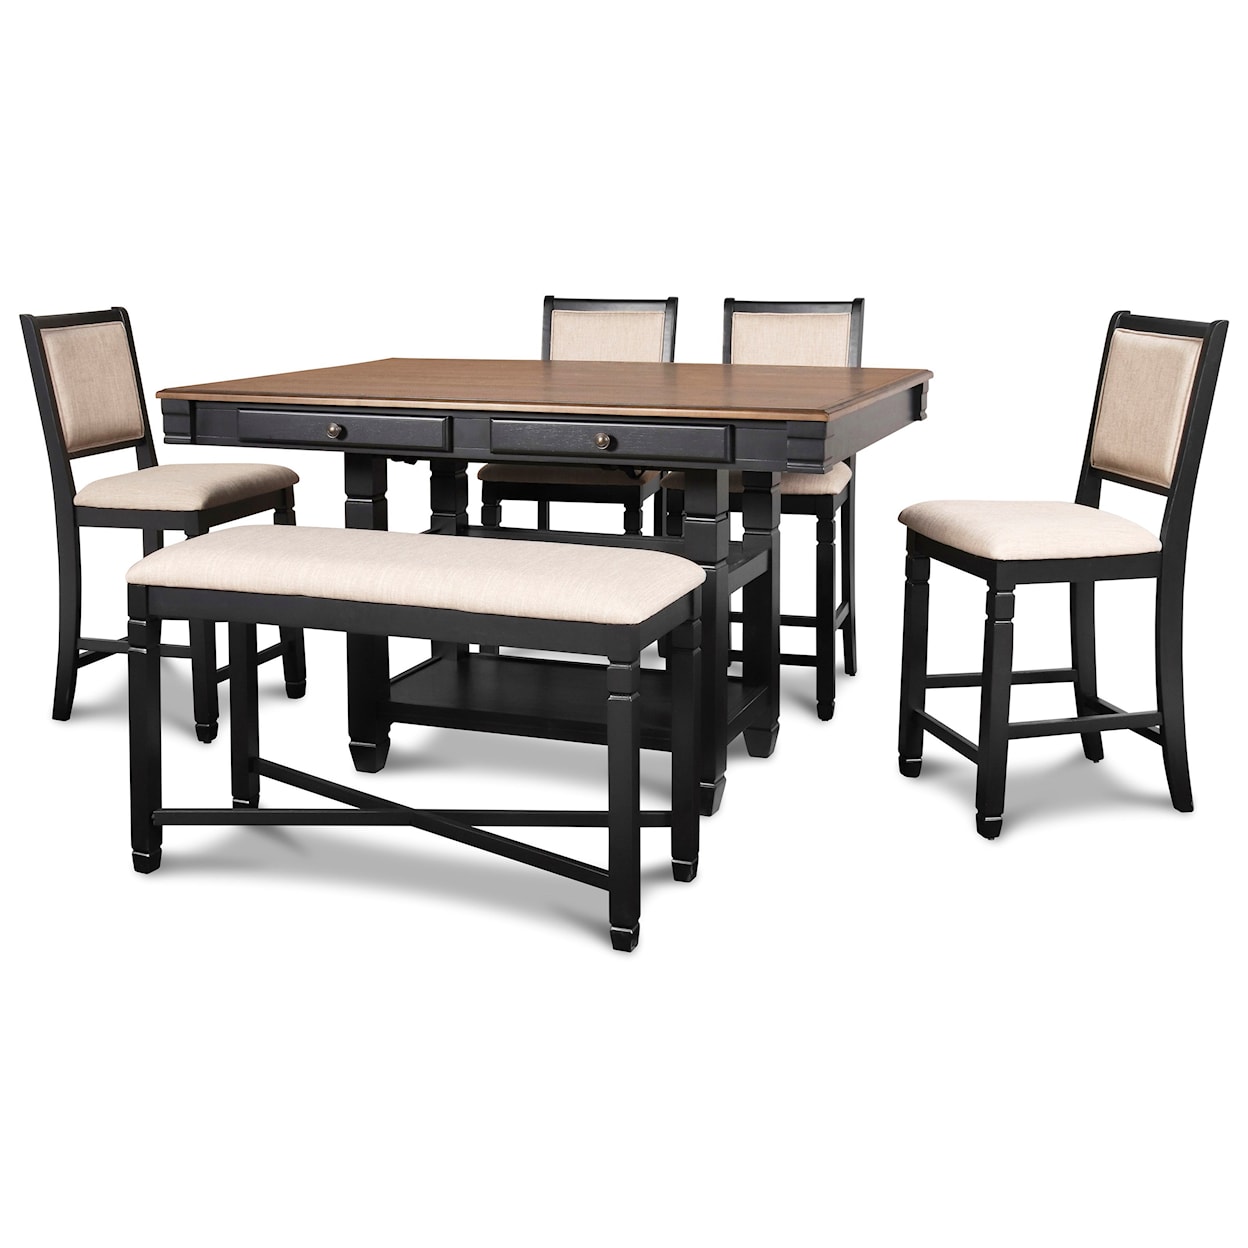 New Classic Prairie Point Table & Chair Set with Bench